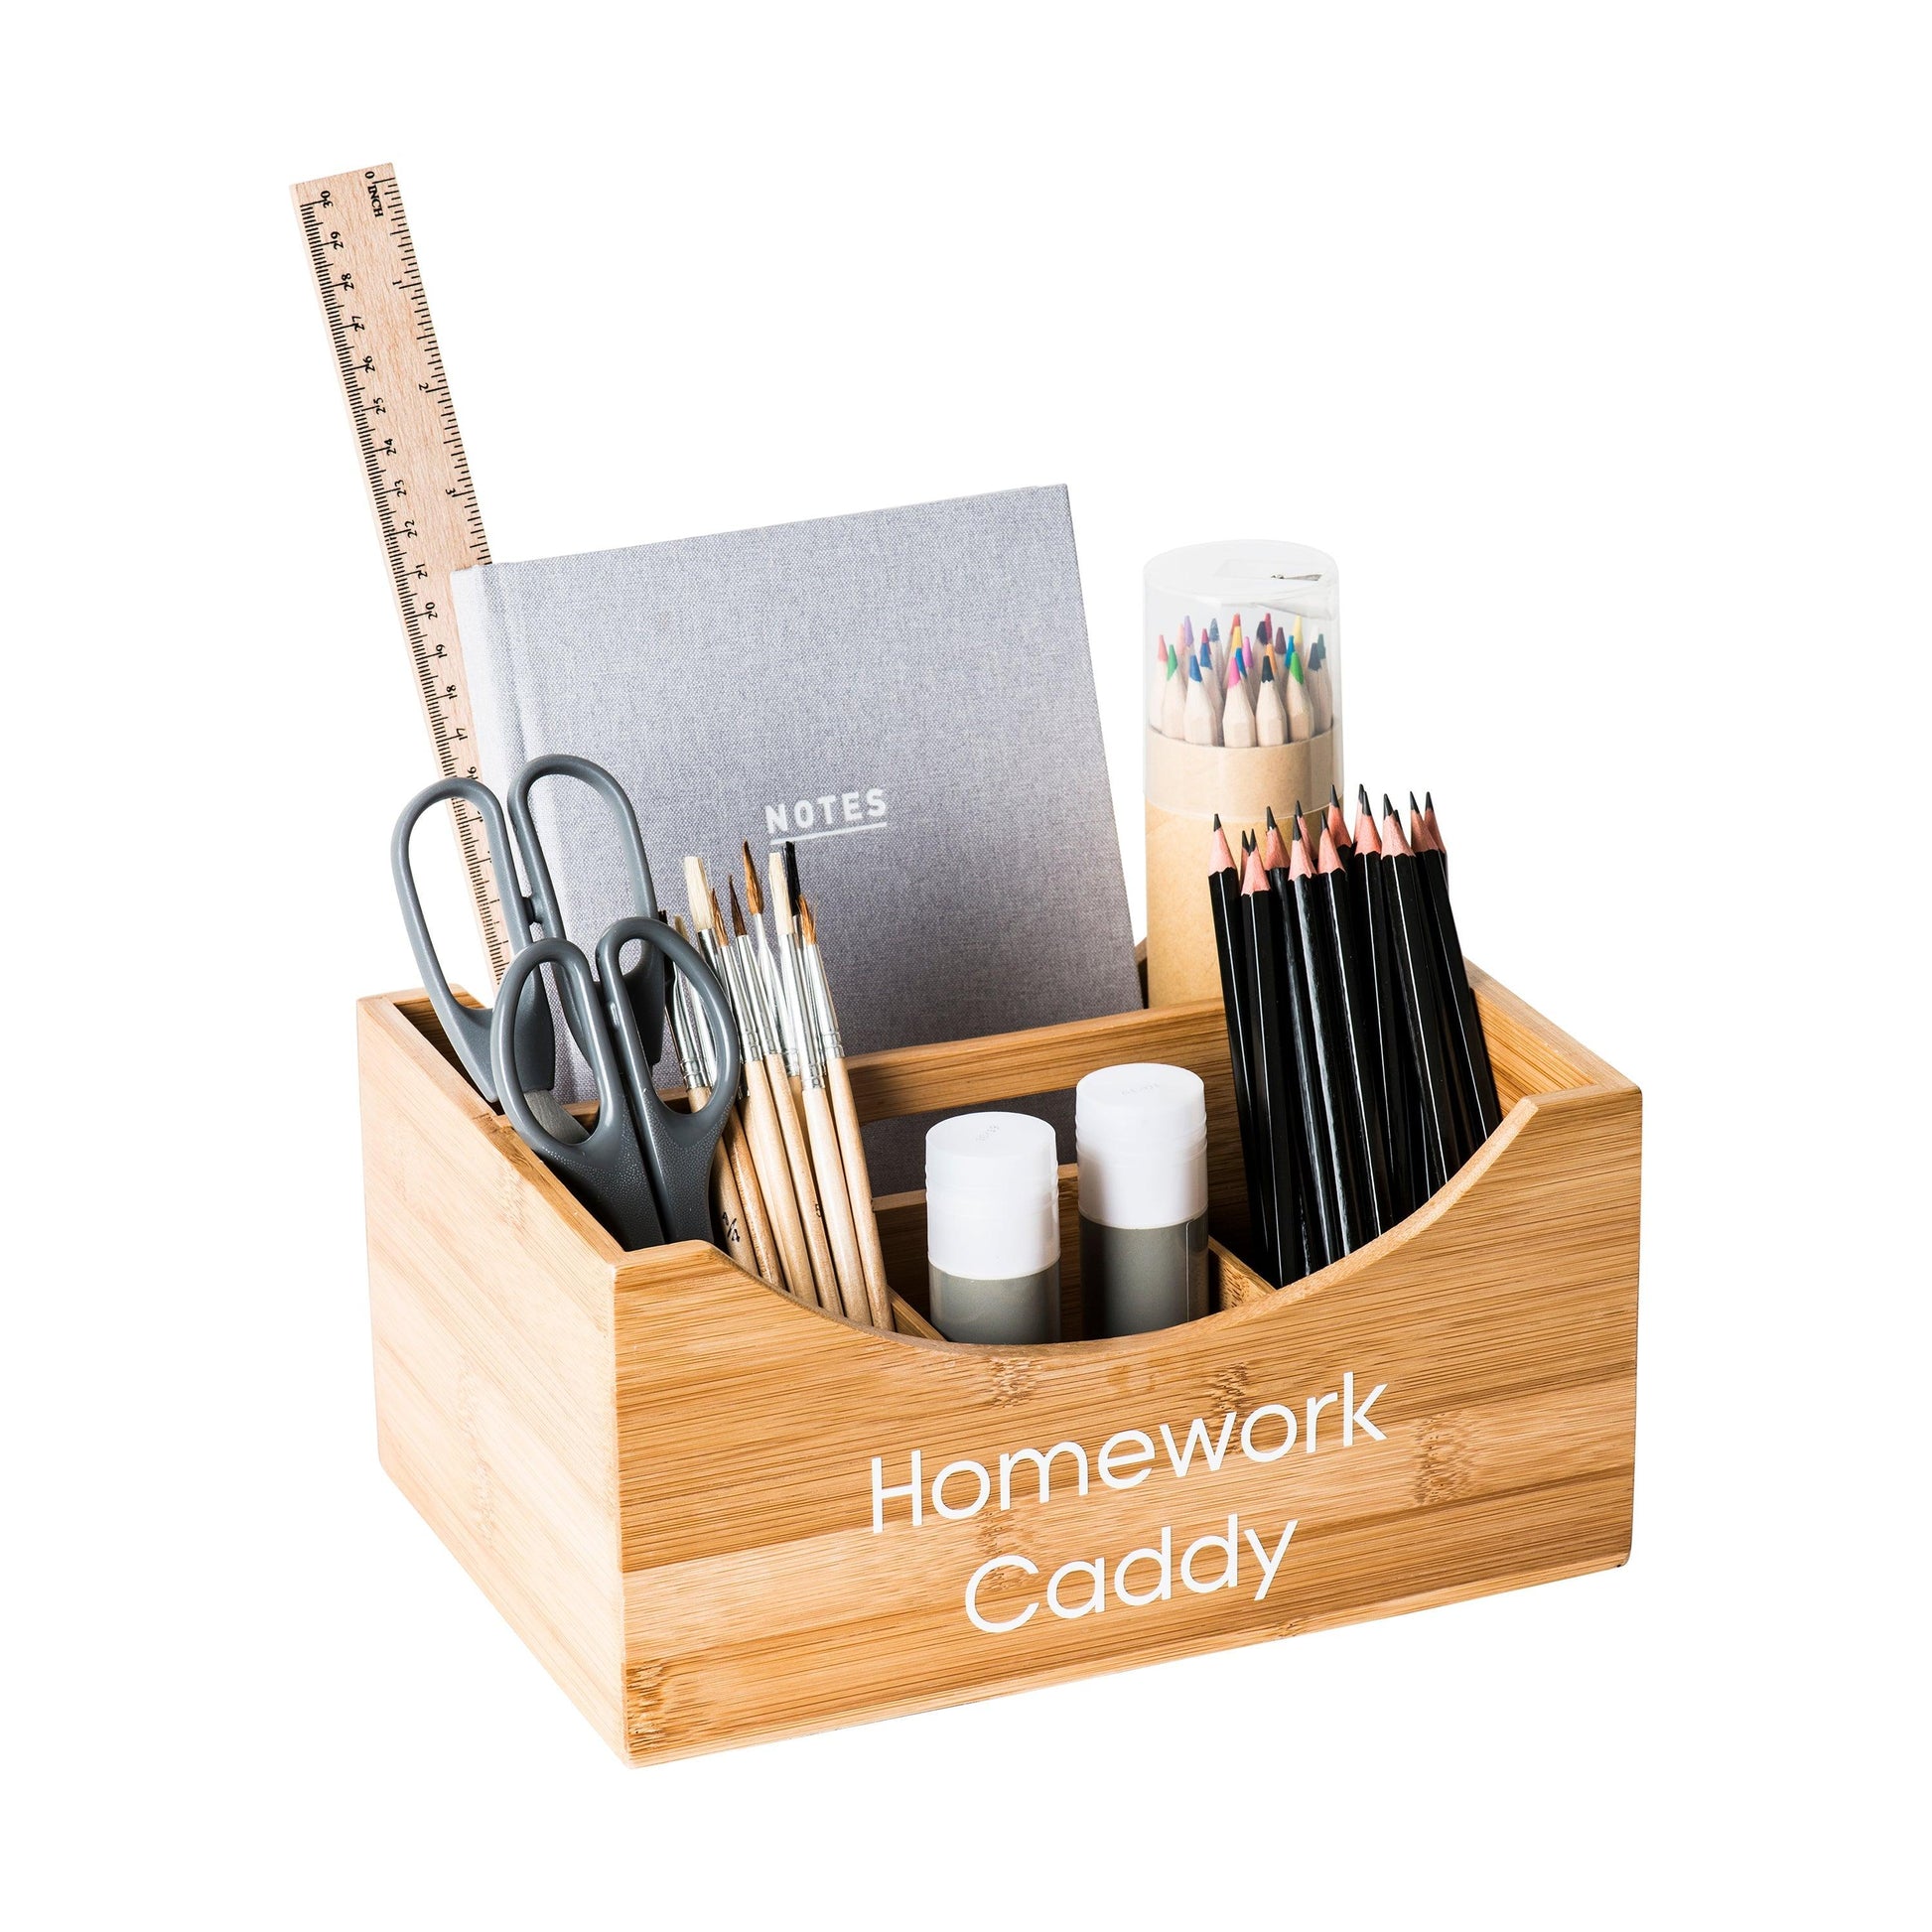 Bamboo Caddy - Little Label Co - Storage & Organization - 20%, Bamboo Storage Solutions, Bathroom & Cleaning, Bathroom Storage, Caddy, Catchoftheday, Kitchen Storage, Multi Use Storage, Office Organisation, warehouse